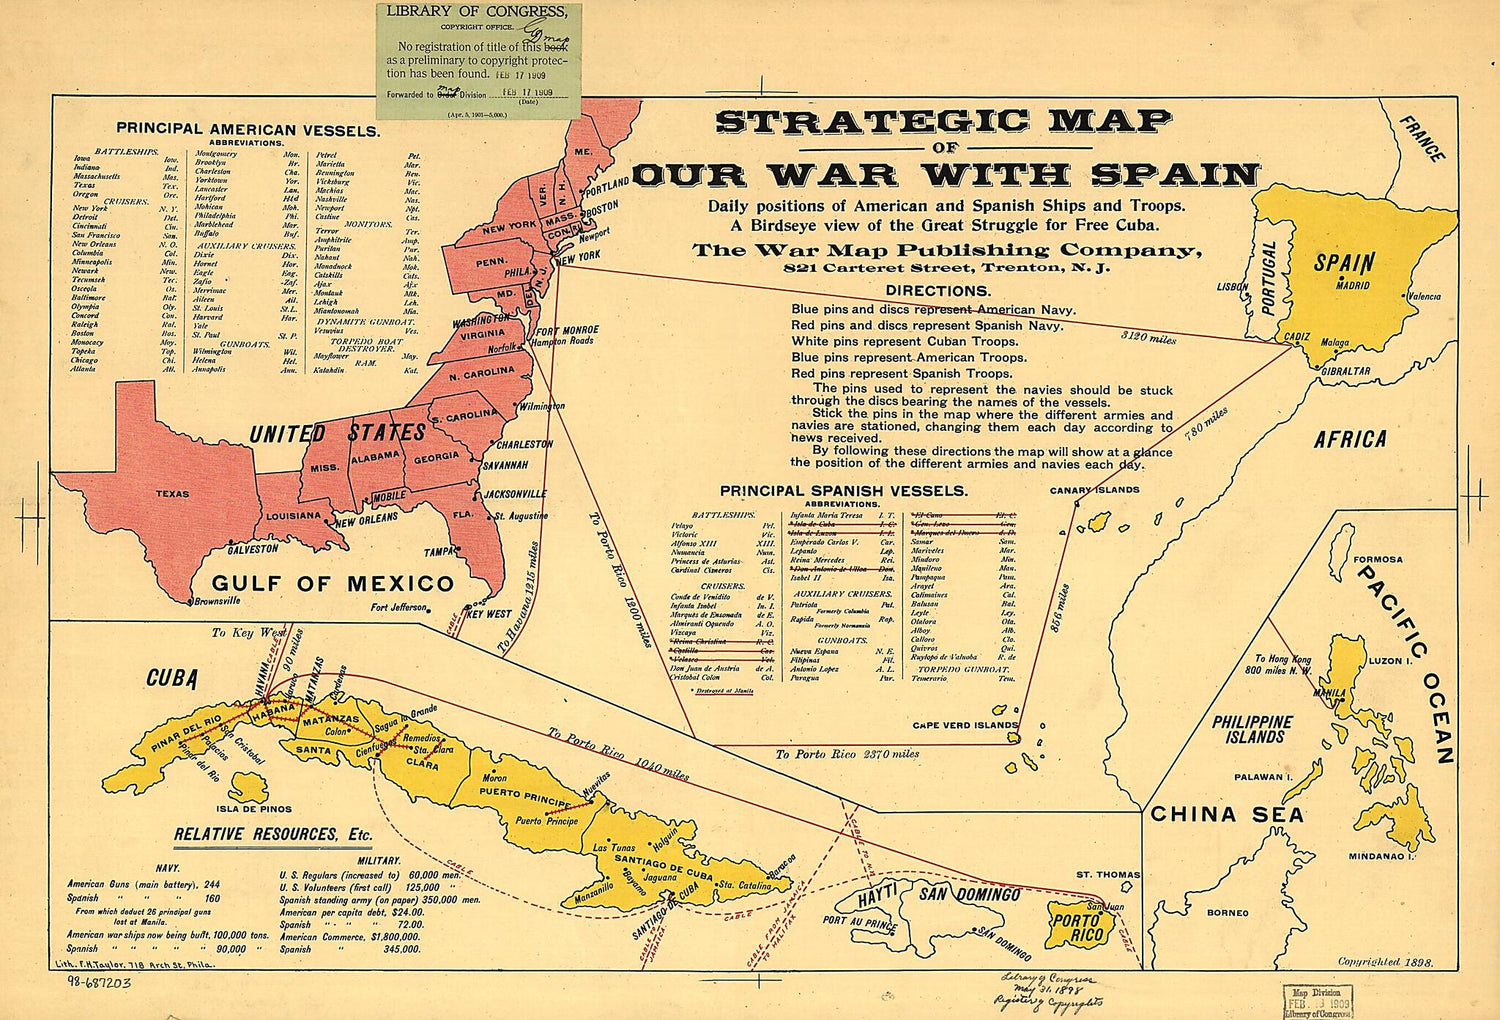 This old map of Strategic Map of Our War With Spain from 1898 was created by  F. H. Taylor,  War Map Publishing Company in 1898